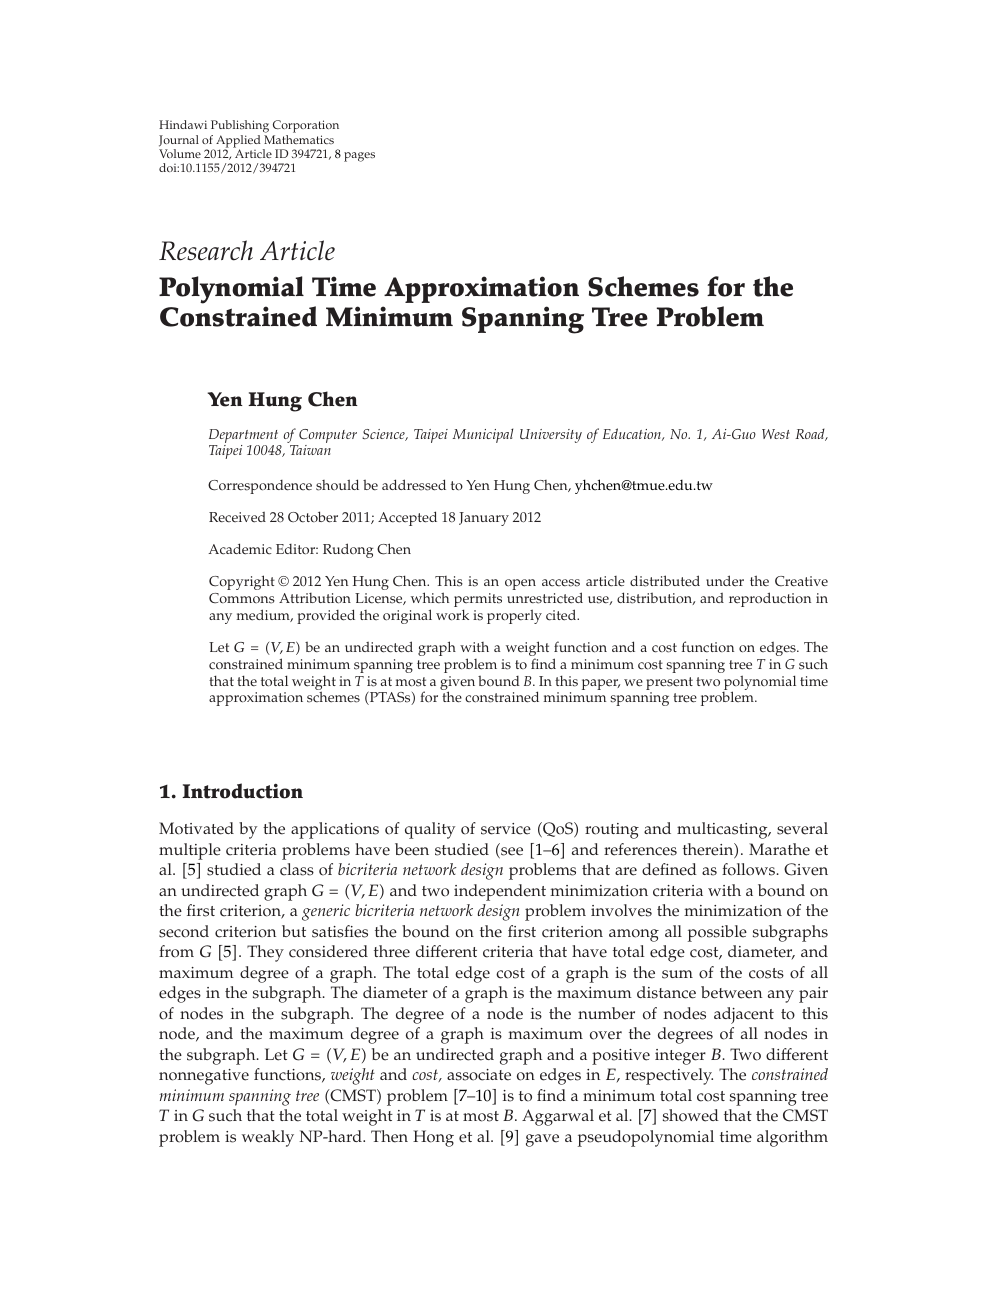 Polynomial Time Approximation Schemes For The Constrained Minimum Spanning Tree Problem Topic Of Research Paper In Mathematics Download Scholarly Article Pdf And Read For Free On Cyberleninka Open Science Hub